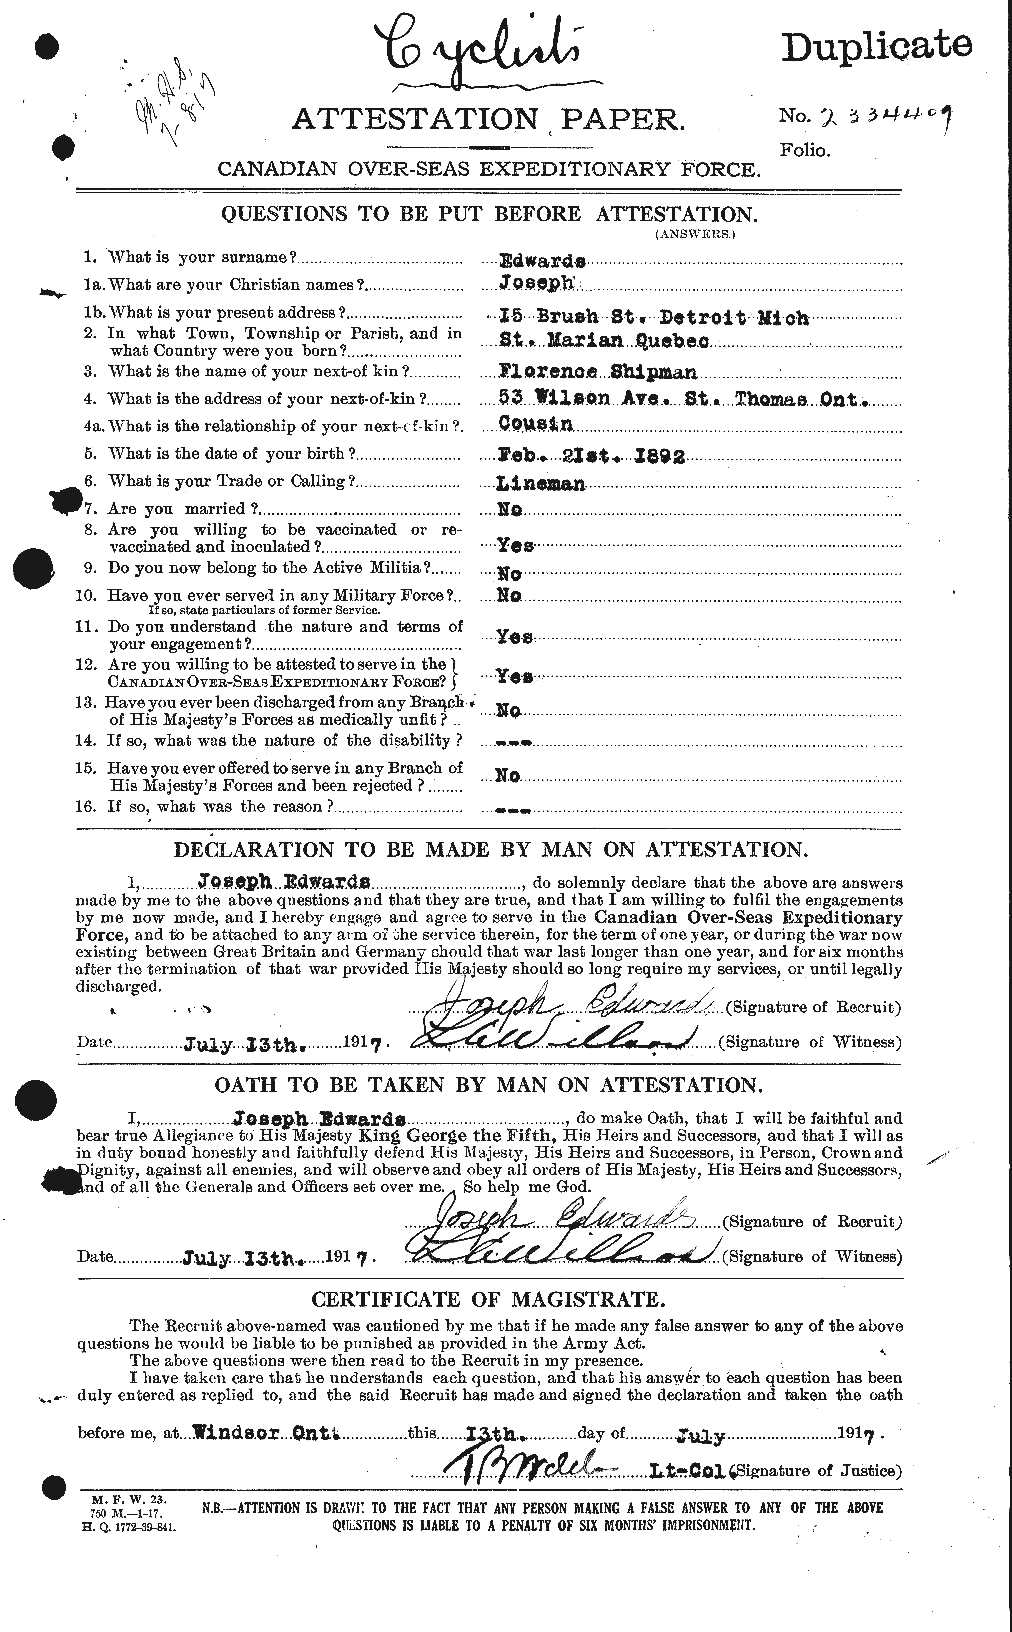 Personnel Records of the First World War - CEF 310173a